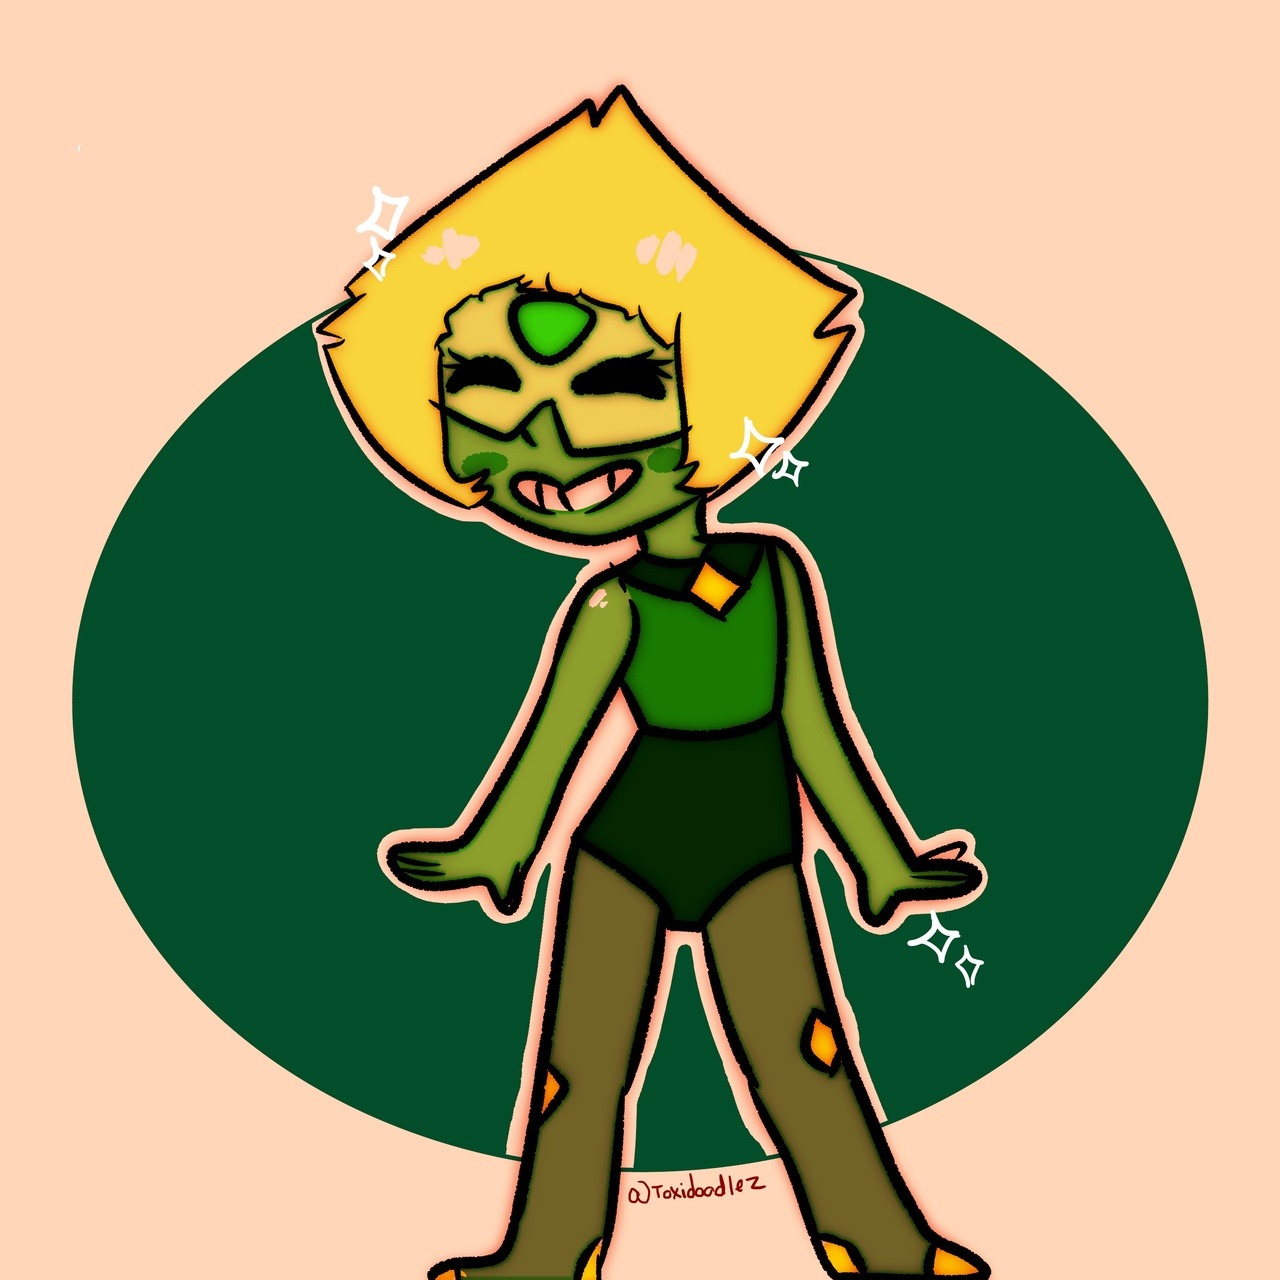 Here’s a sassy Peridot before bed